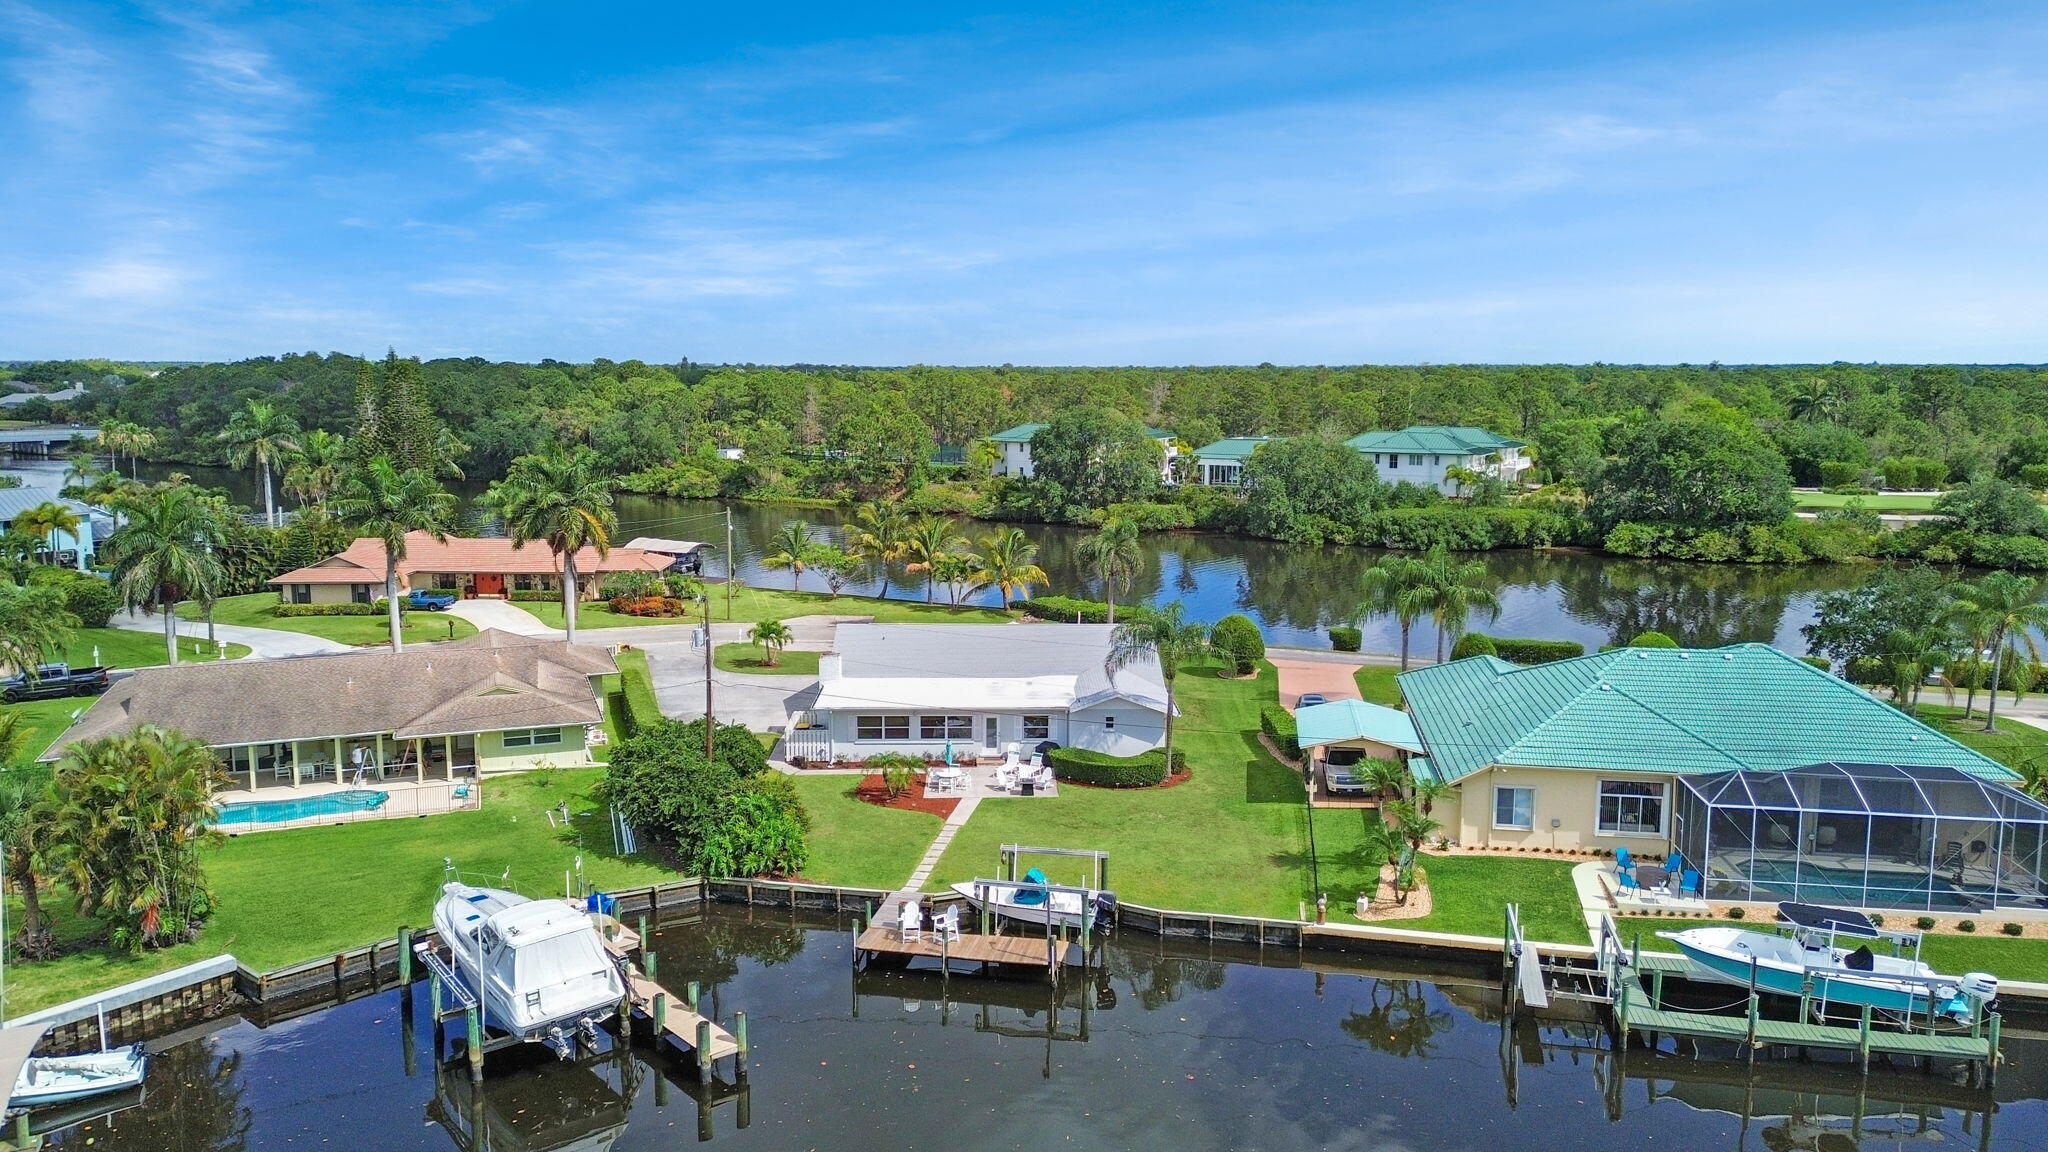 Discover this boaters paradise in Hidden River on Pine Tree Ln, boasts a private dock and a 10,000 pound boat lift along with a newer roof.  This charming CBS 3-bedroom, 2-bath home in scenic Palm City.  This one-of-a-kind lot features expansive water views both in the front and rear, enhancing its allure.  This property provides direct ocean access--no fixed bridges to navigate, making it ideal for boating enthusiasts. The spacious outdoor area offers substantial potential for customization, including ample room for a pool, perfect for creating your personal oasis. A rare opportunity to tailor and enhance in a sought-after neighborhood.  Partial seller financing possible.